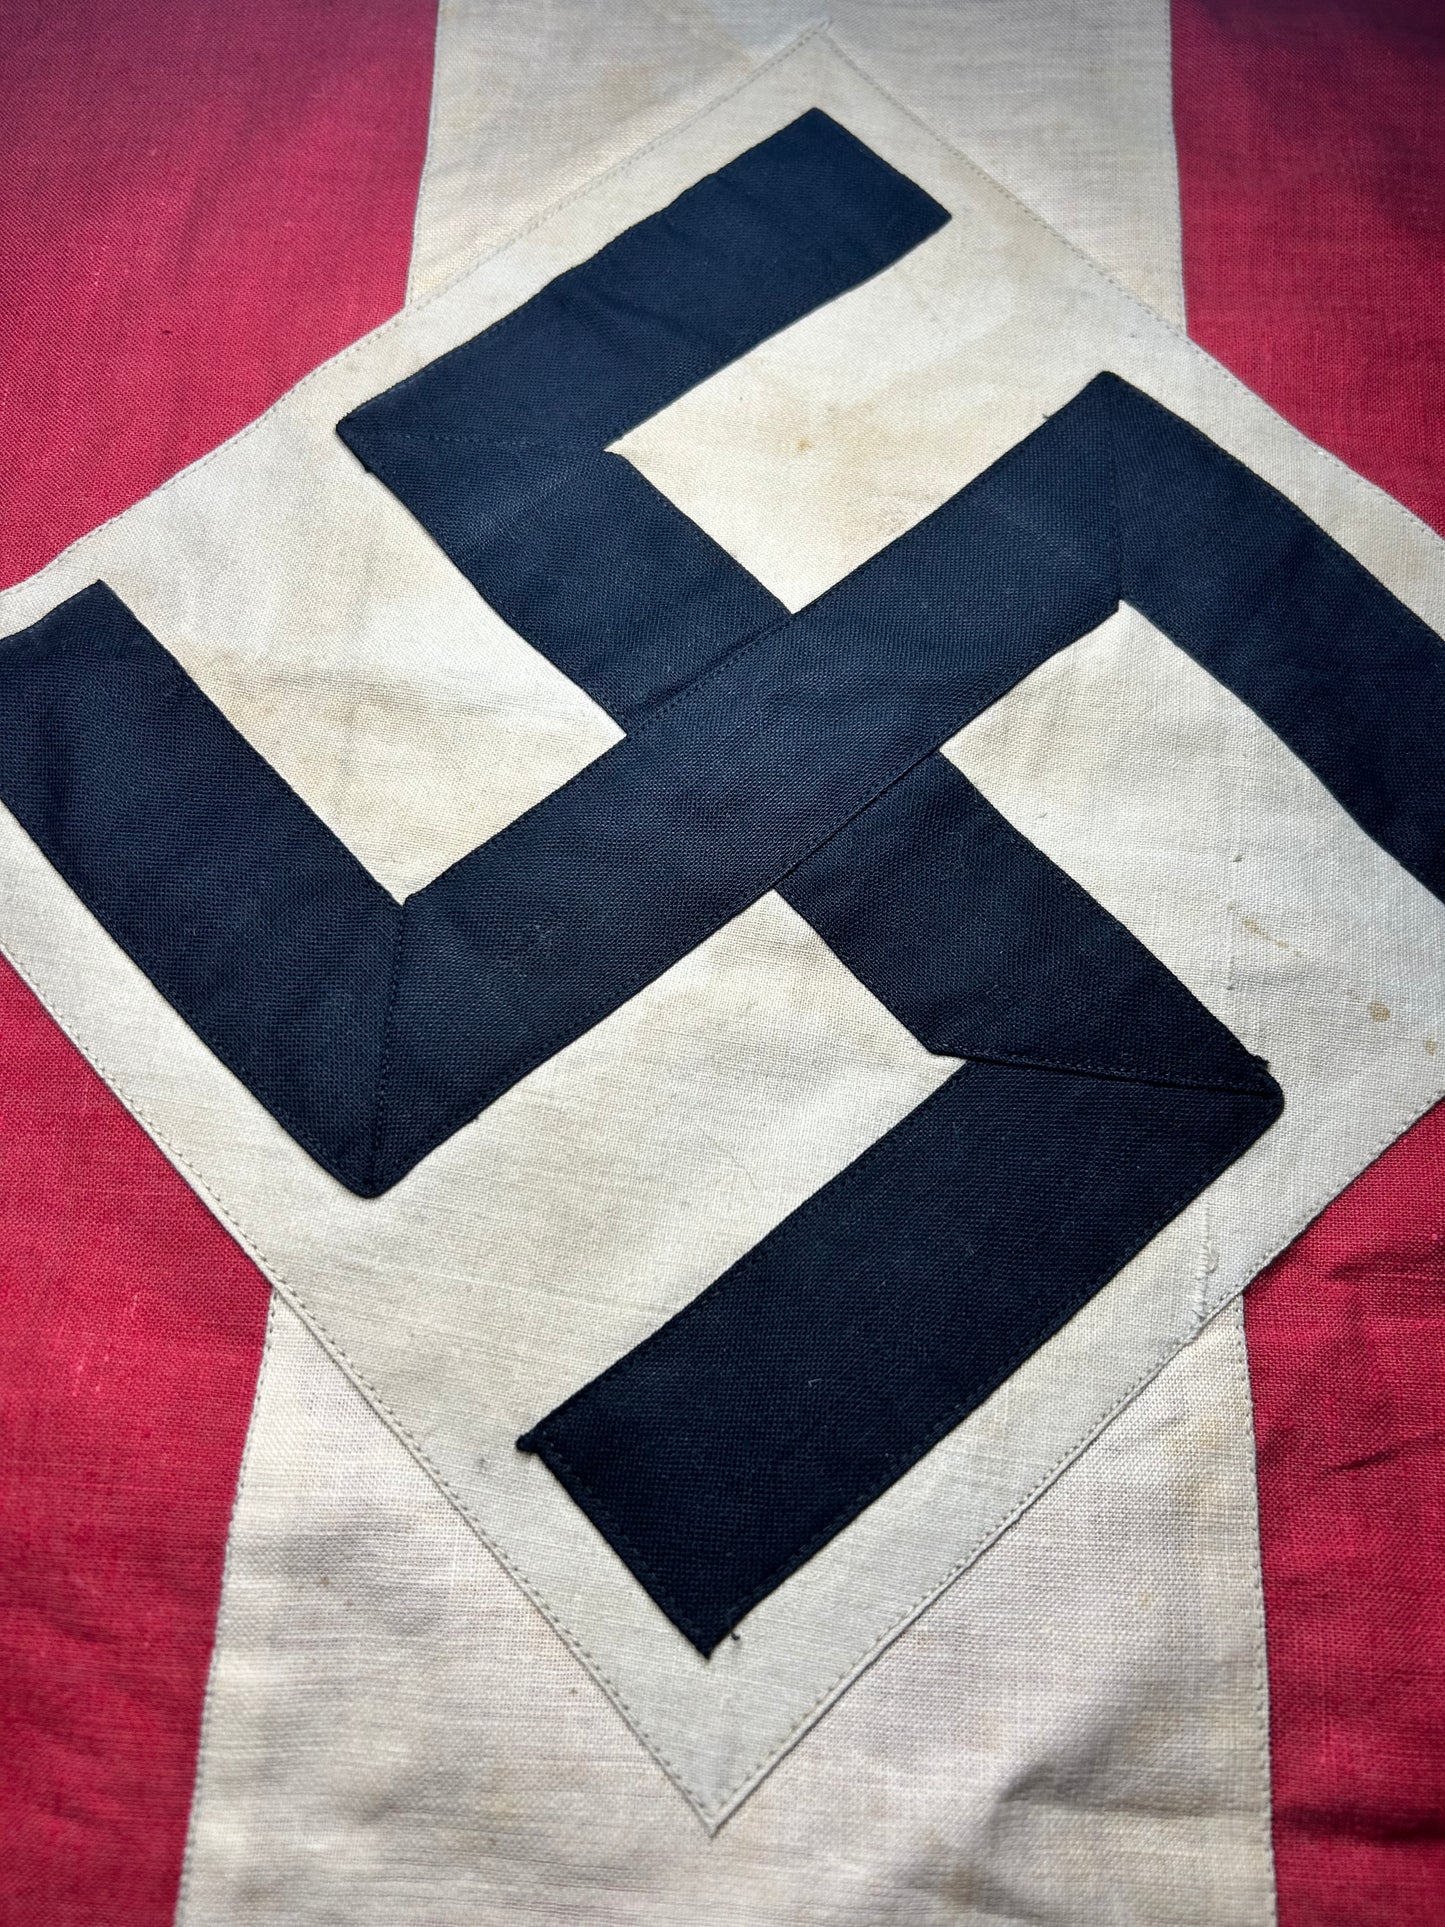 Medium Size Hitler Youth Flag For Personal Use